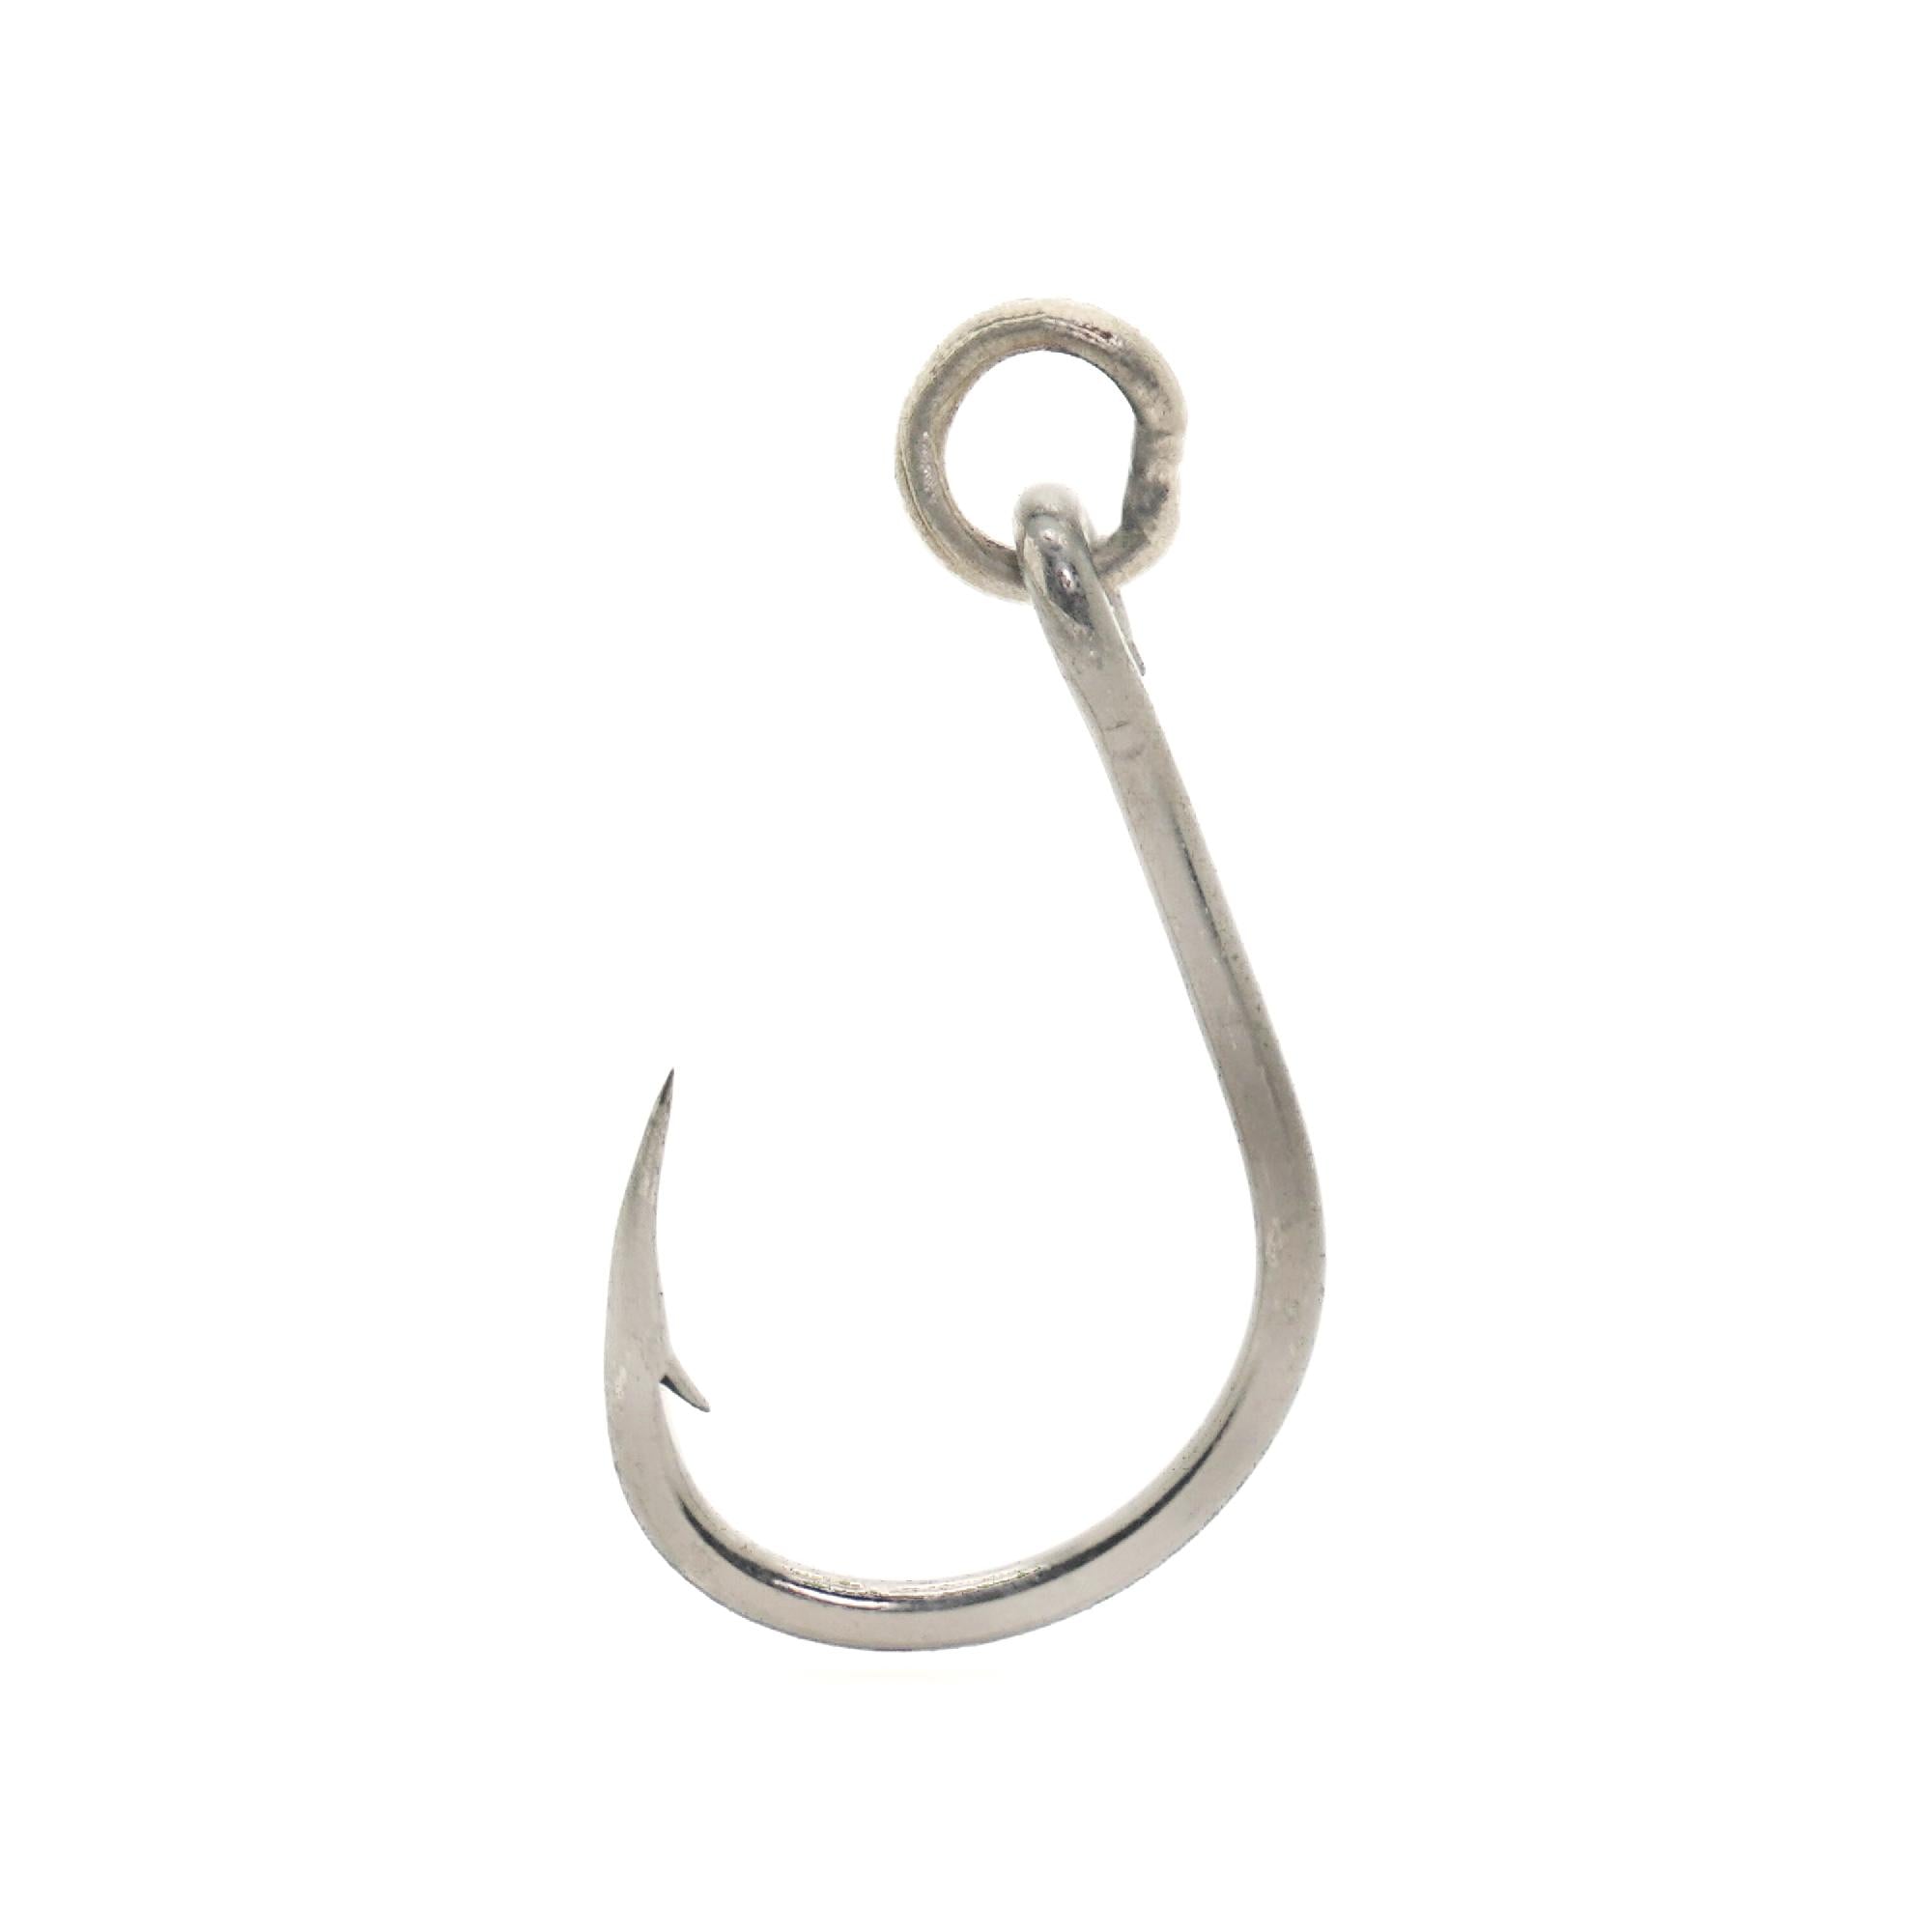 Hoodlum® Hook with Action Ring - 4X Strong